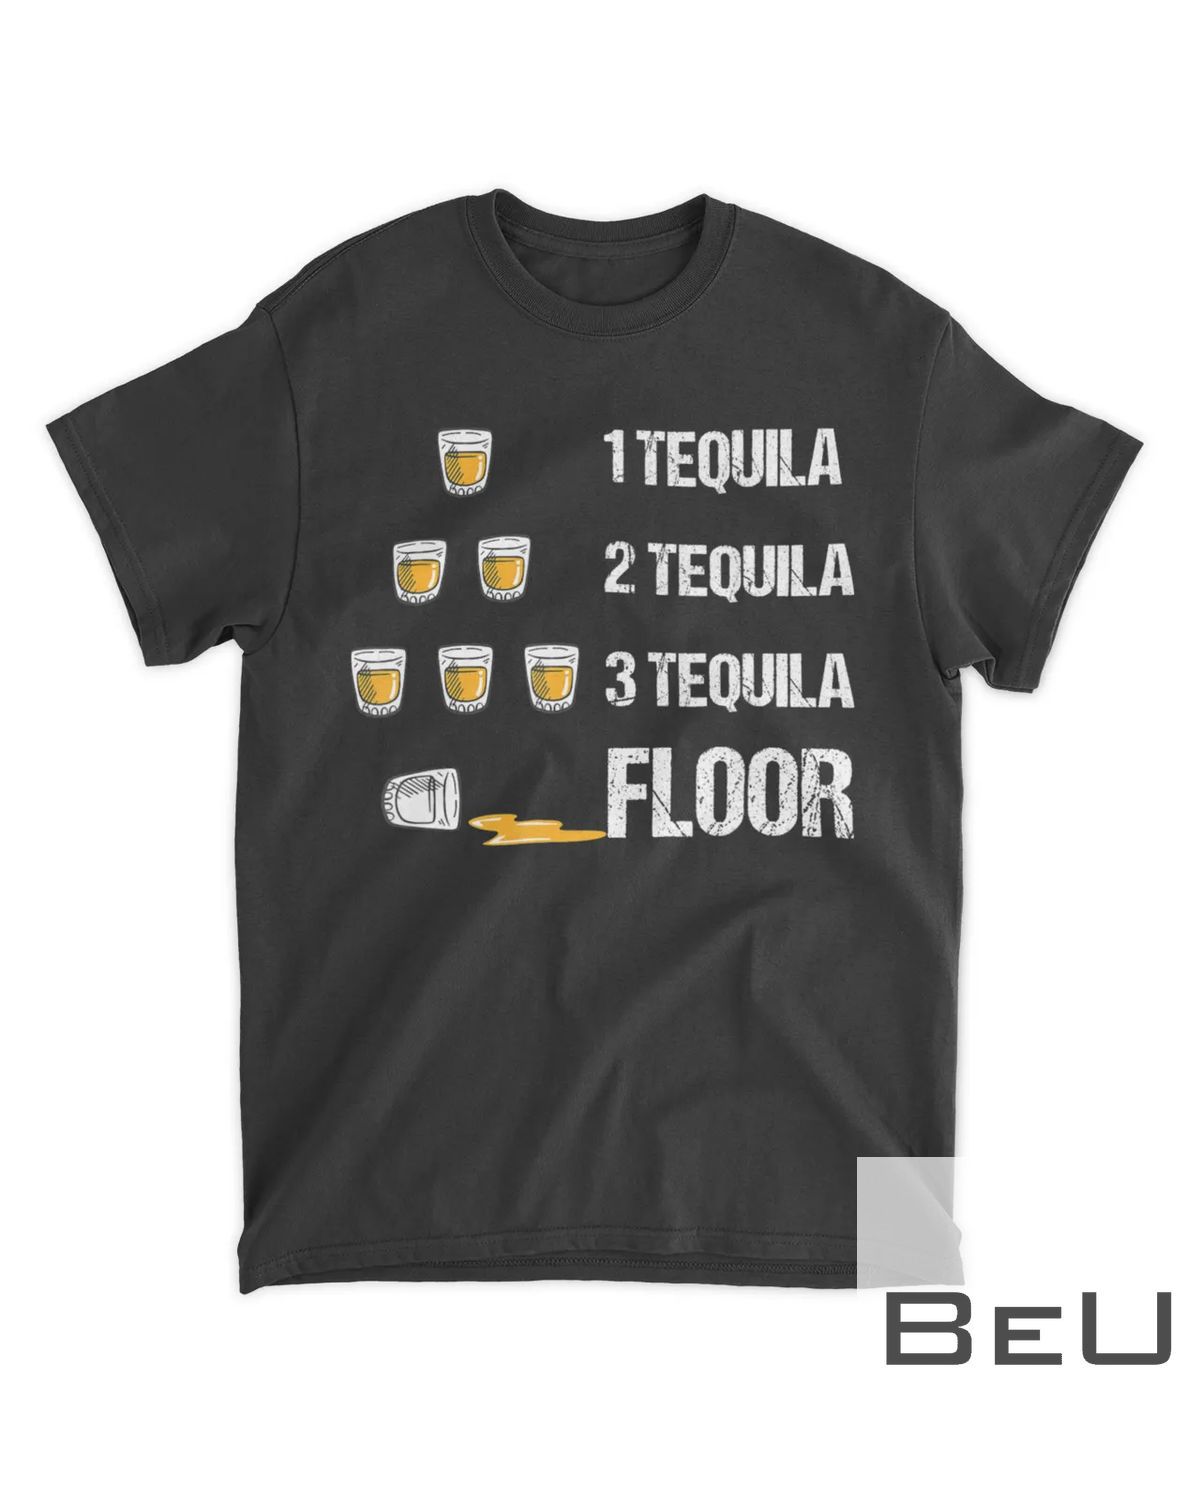 1 Tequila 2 Tequila 3 Tequila Floor Funny Drinking T-Shirt